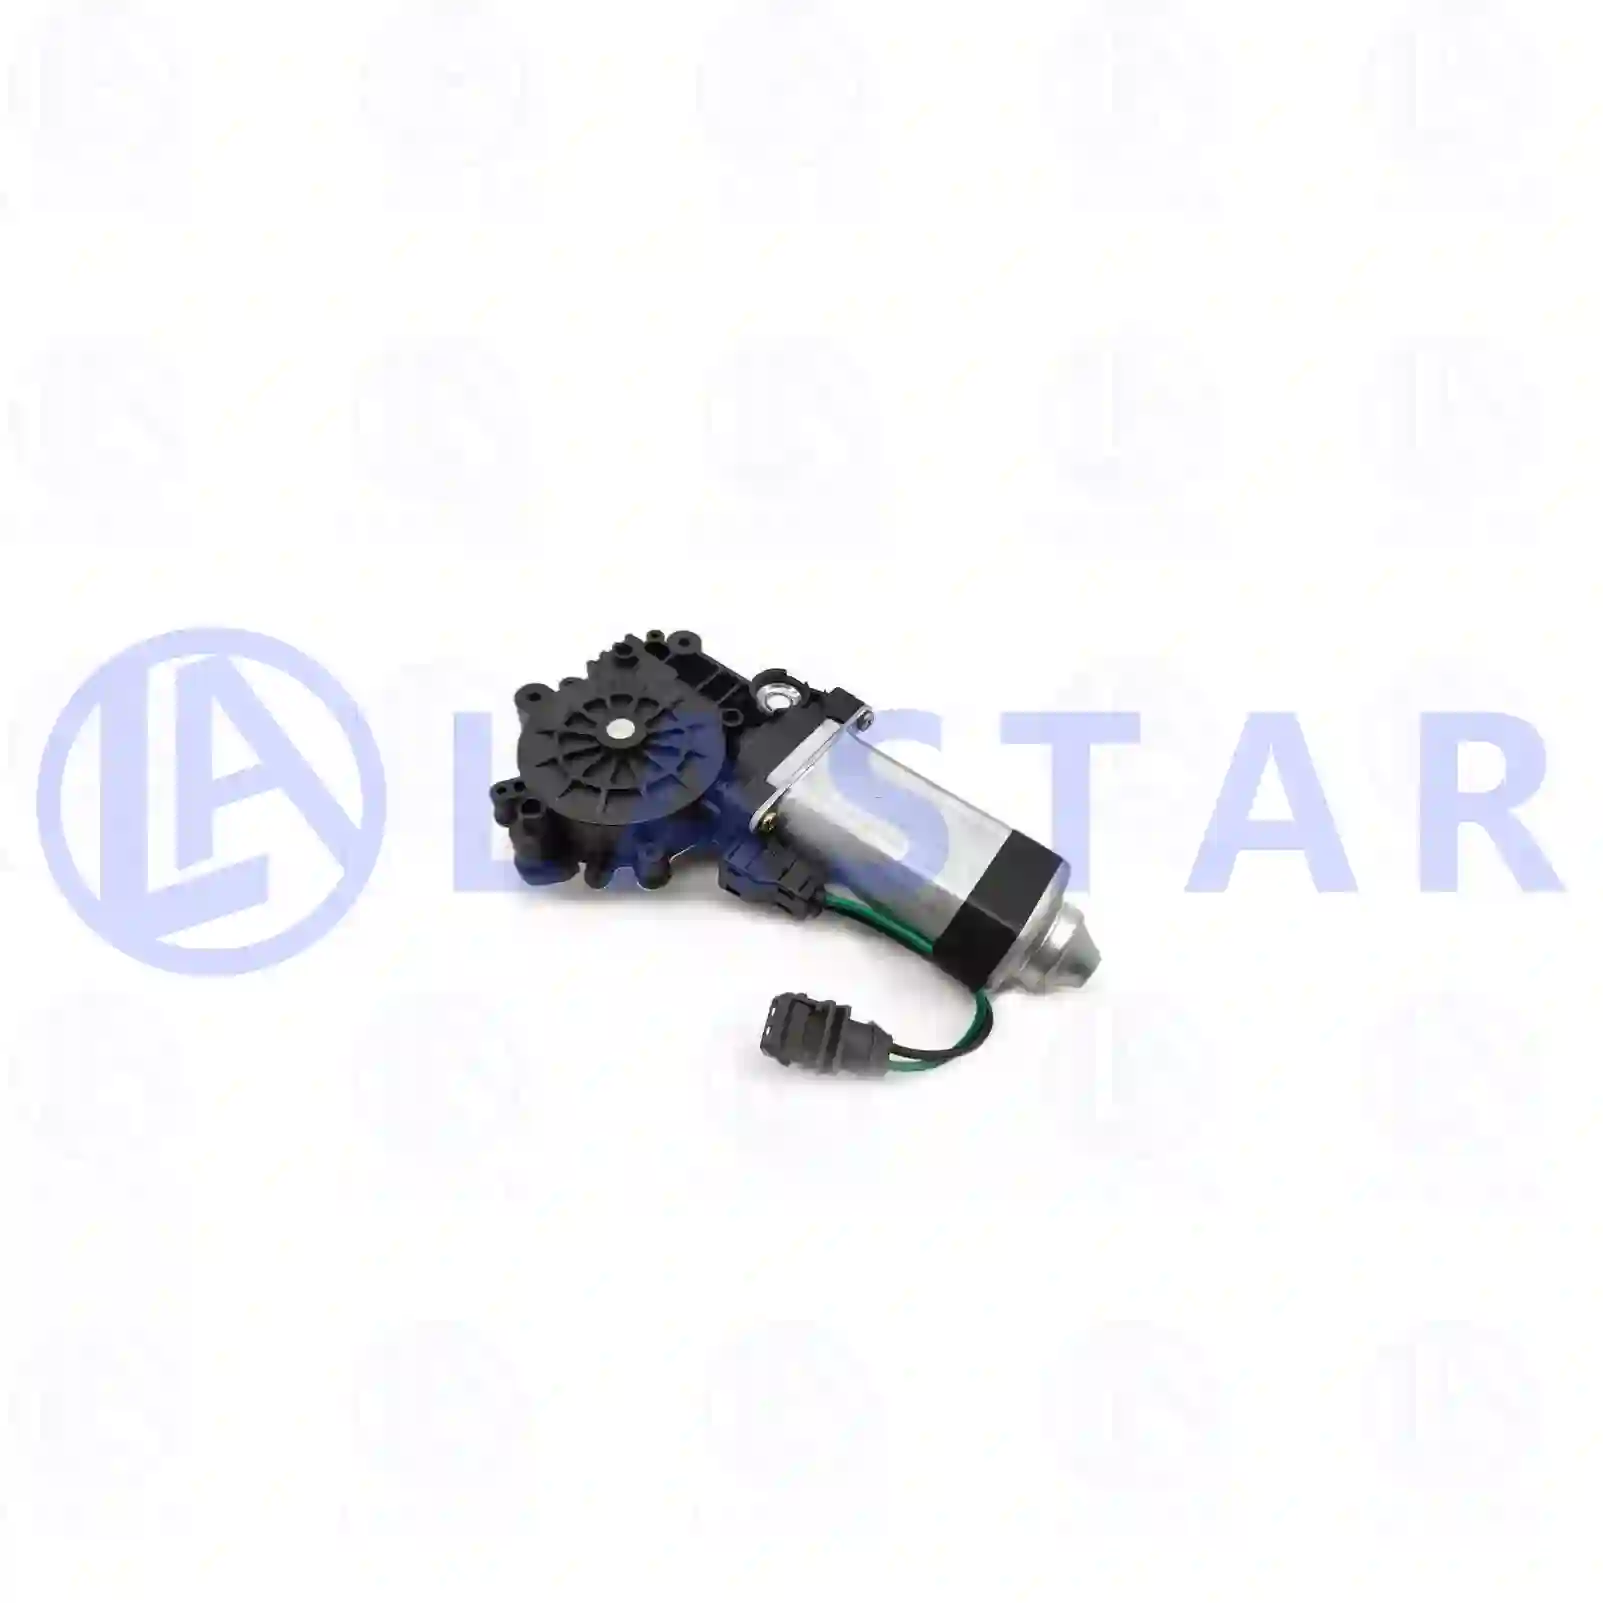 Window lifter motor, right, 77718919, 0058209142, ZG61280-0008 ||  77718919 Lastar Spare Part | Truck Spare Parts, Auotomotive Spare Parts Window lifter motor, right, 77718919, 0058209142, ZG61280-0008 ||  77718919 Lastar Spare Part | Truck Spare Parts, Auotomotive Spare Parts